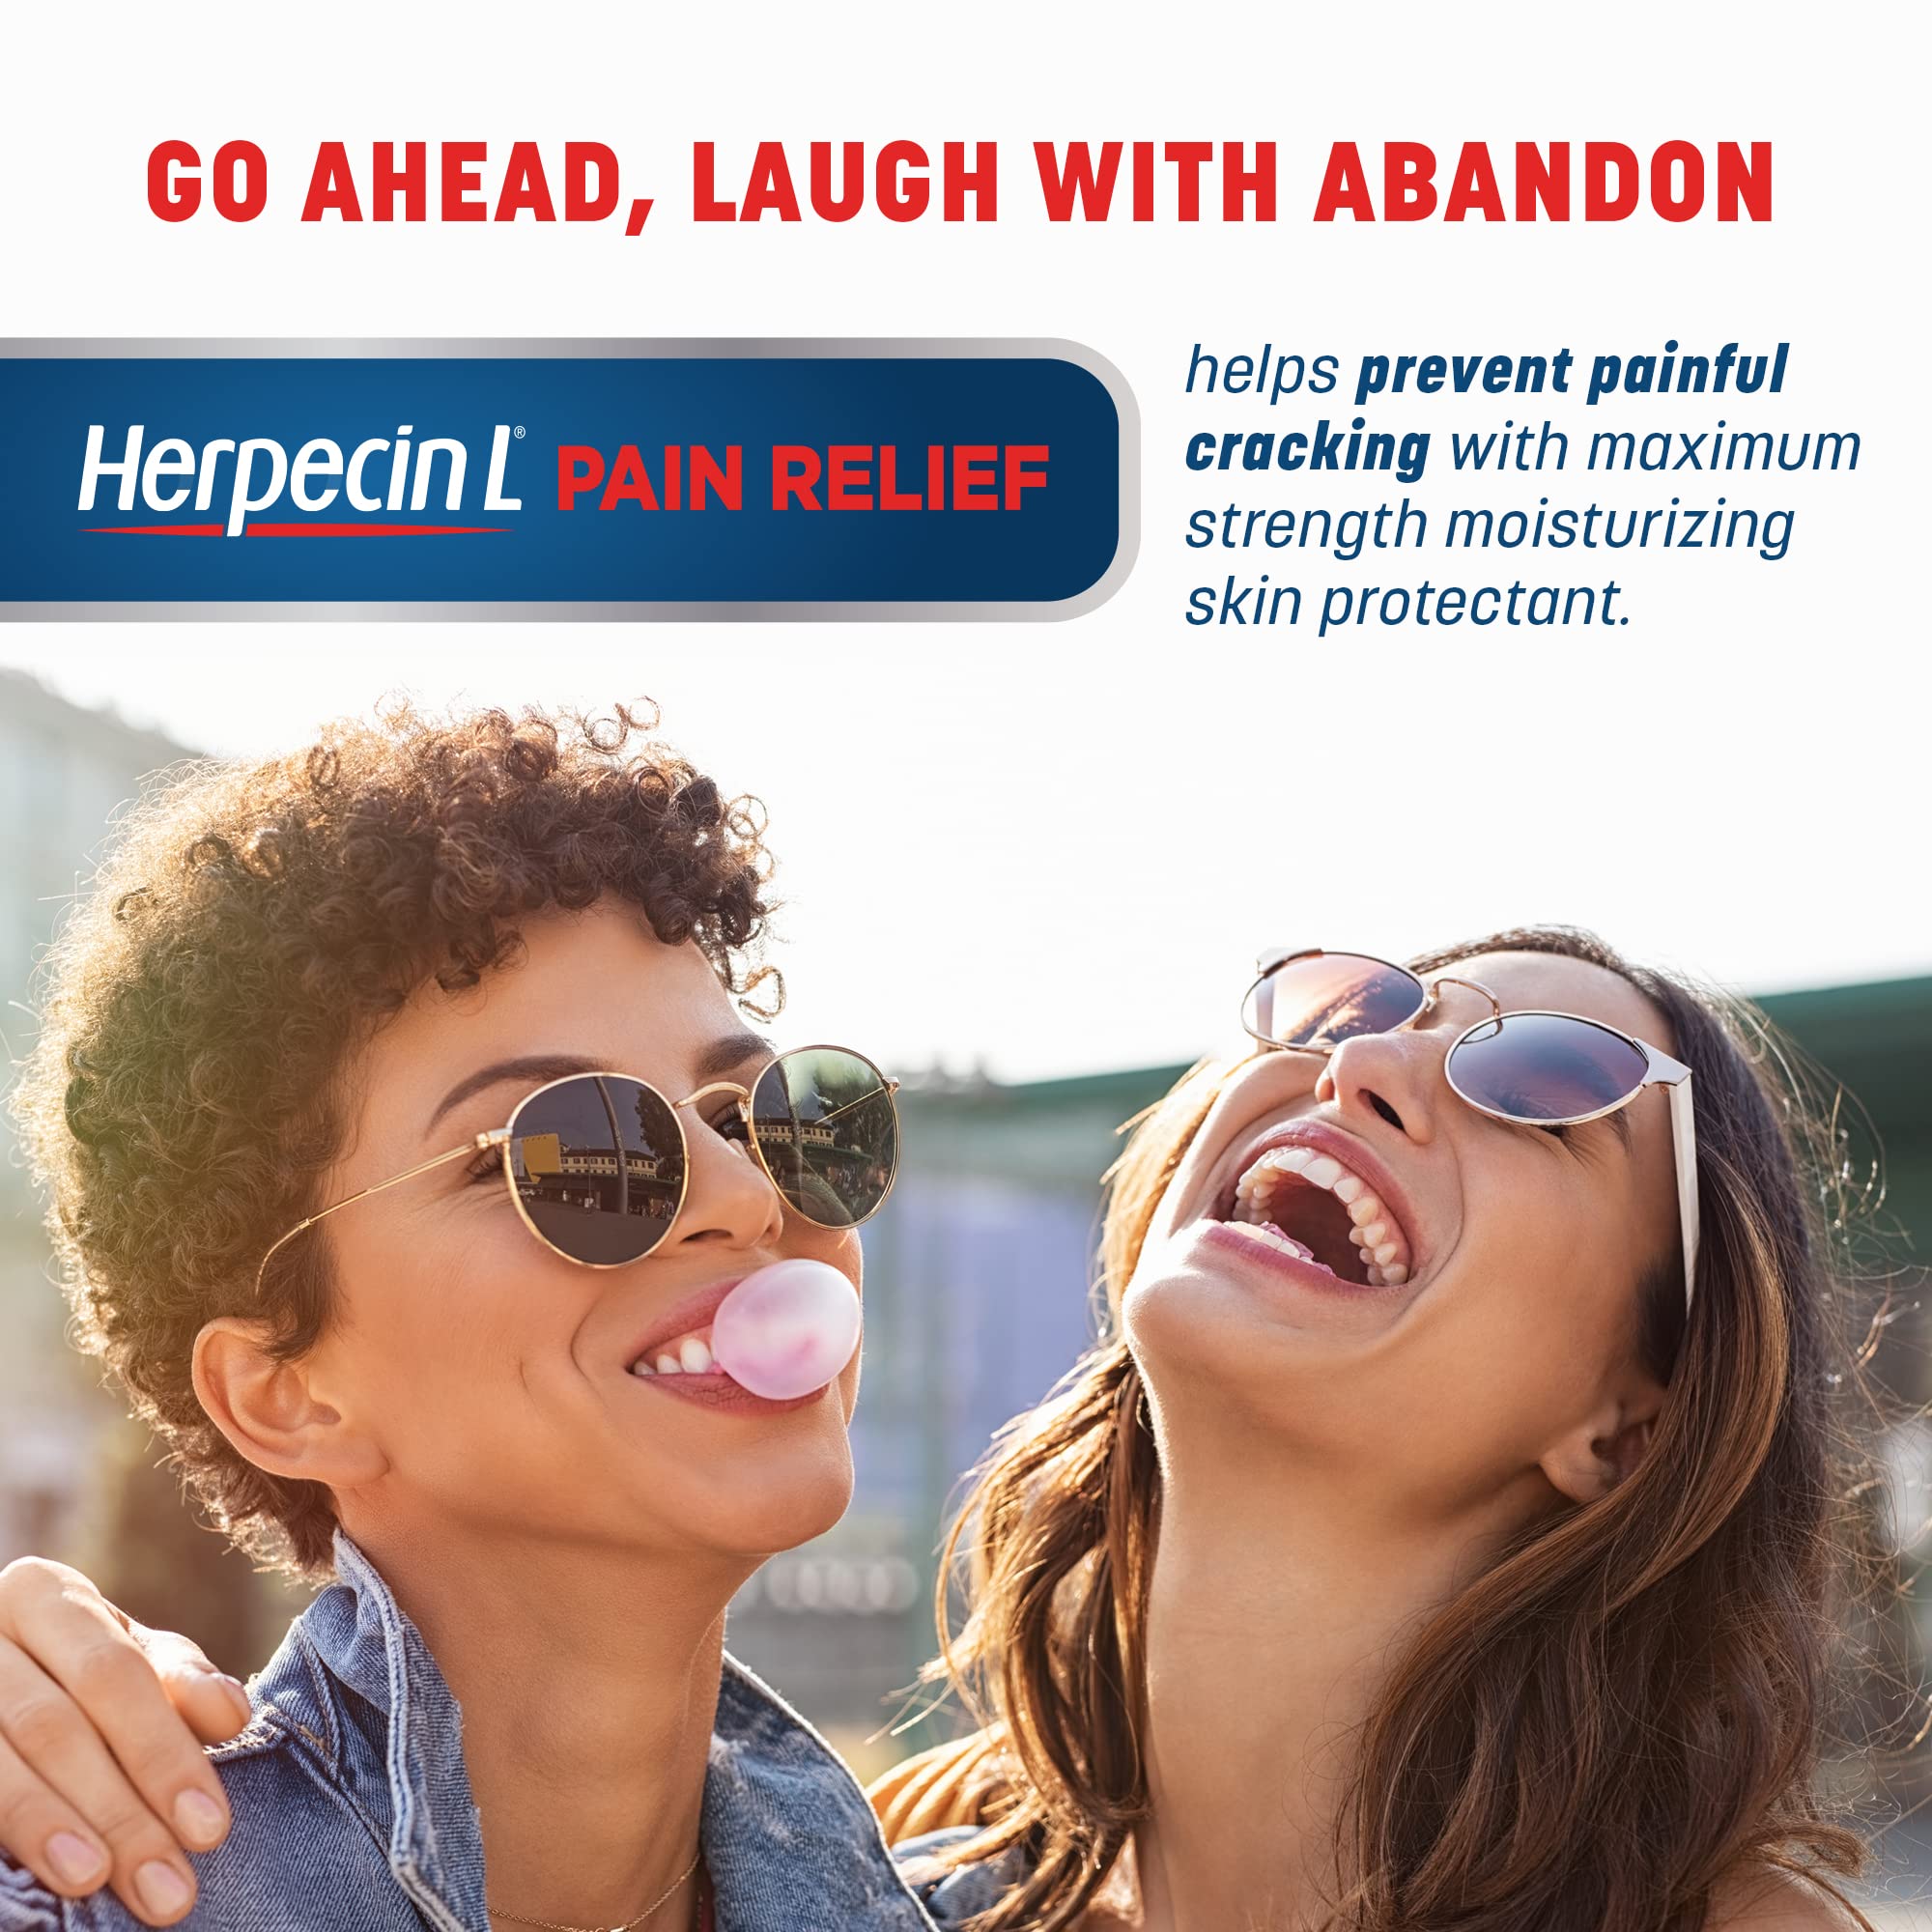 Herpecin-L Pain Relief Triple Action with Lidocaine Cold Sore and Fever Blister Treatment, 0.15 oz